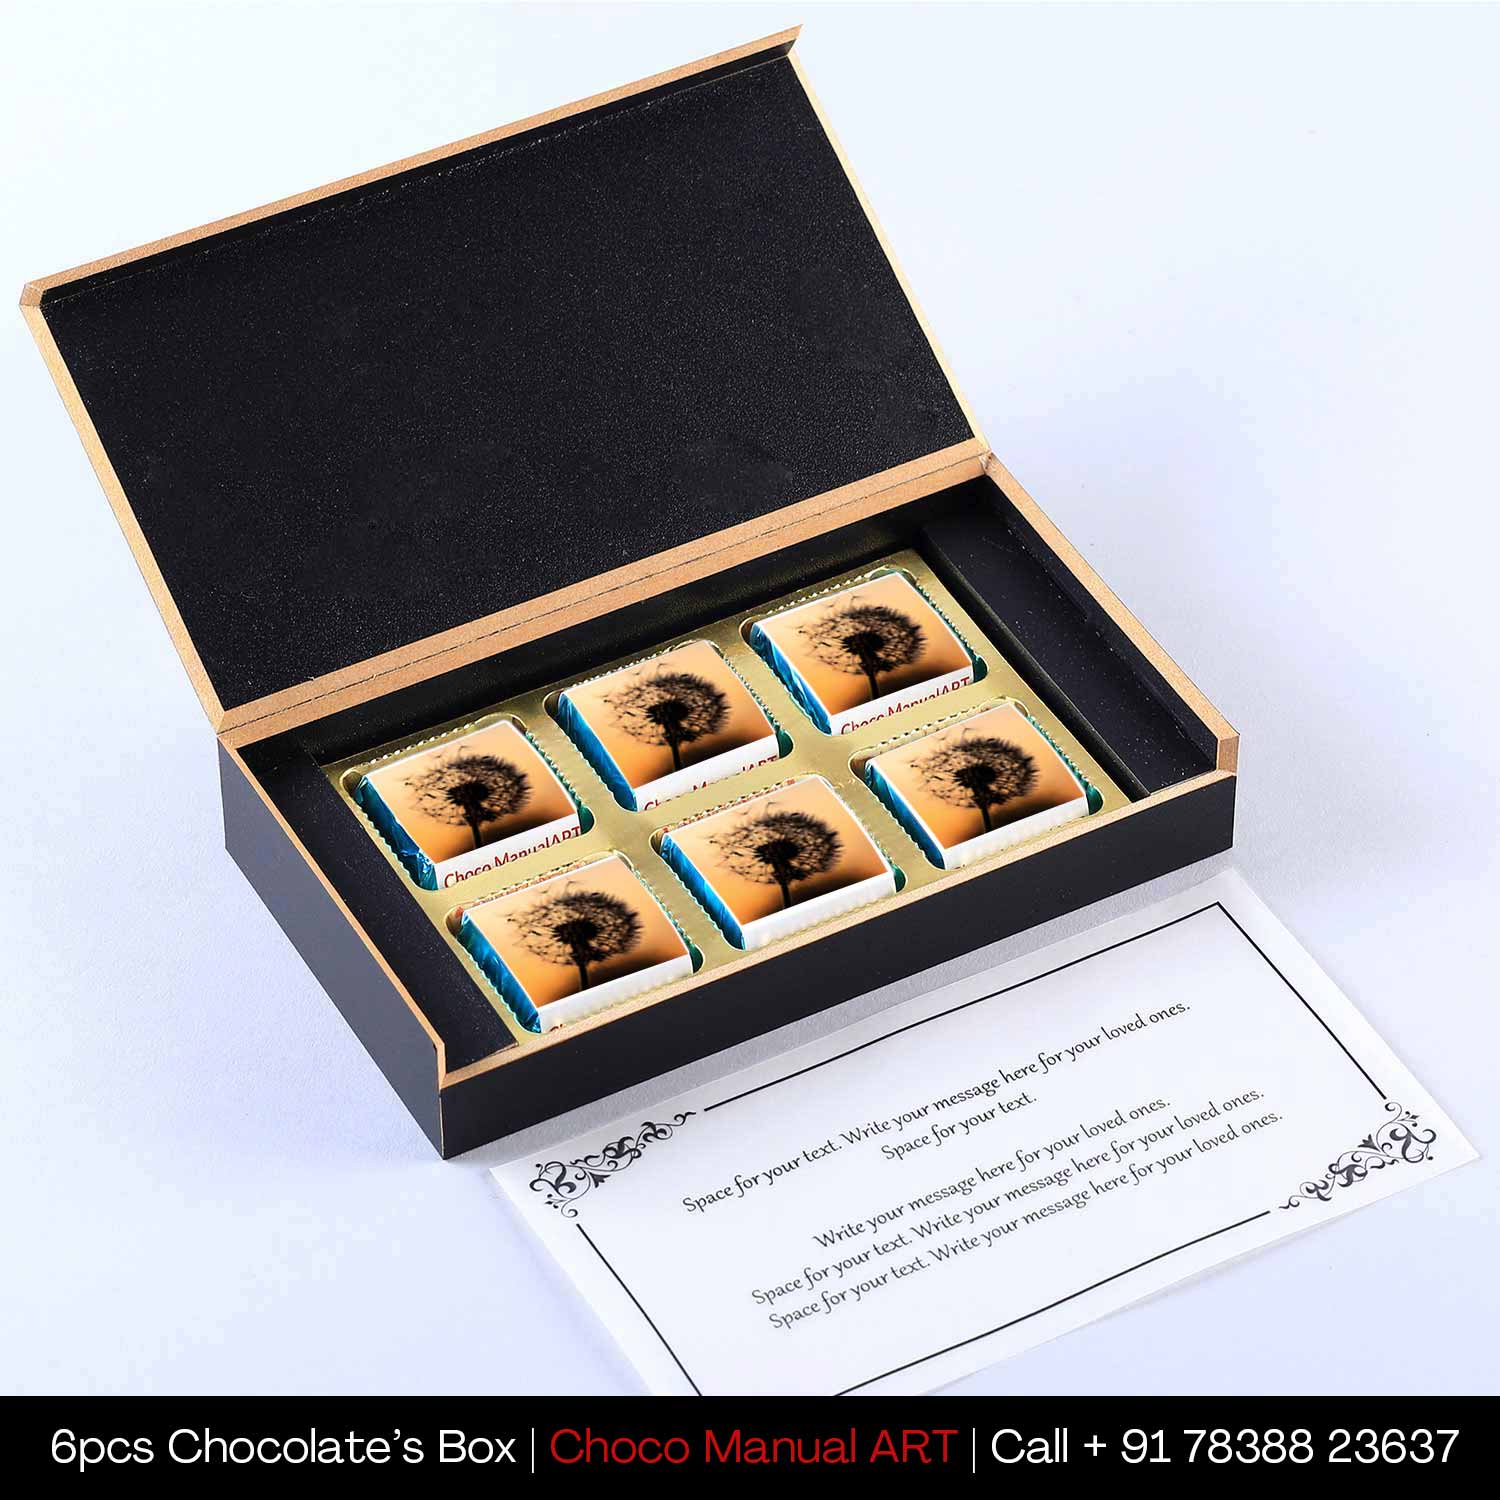 Buy online  Gifts in India I Shipping across India I Delicious chocolates